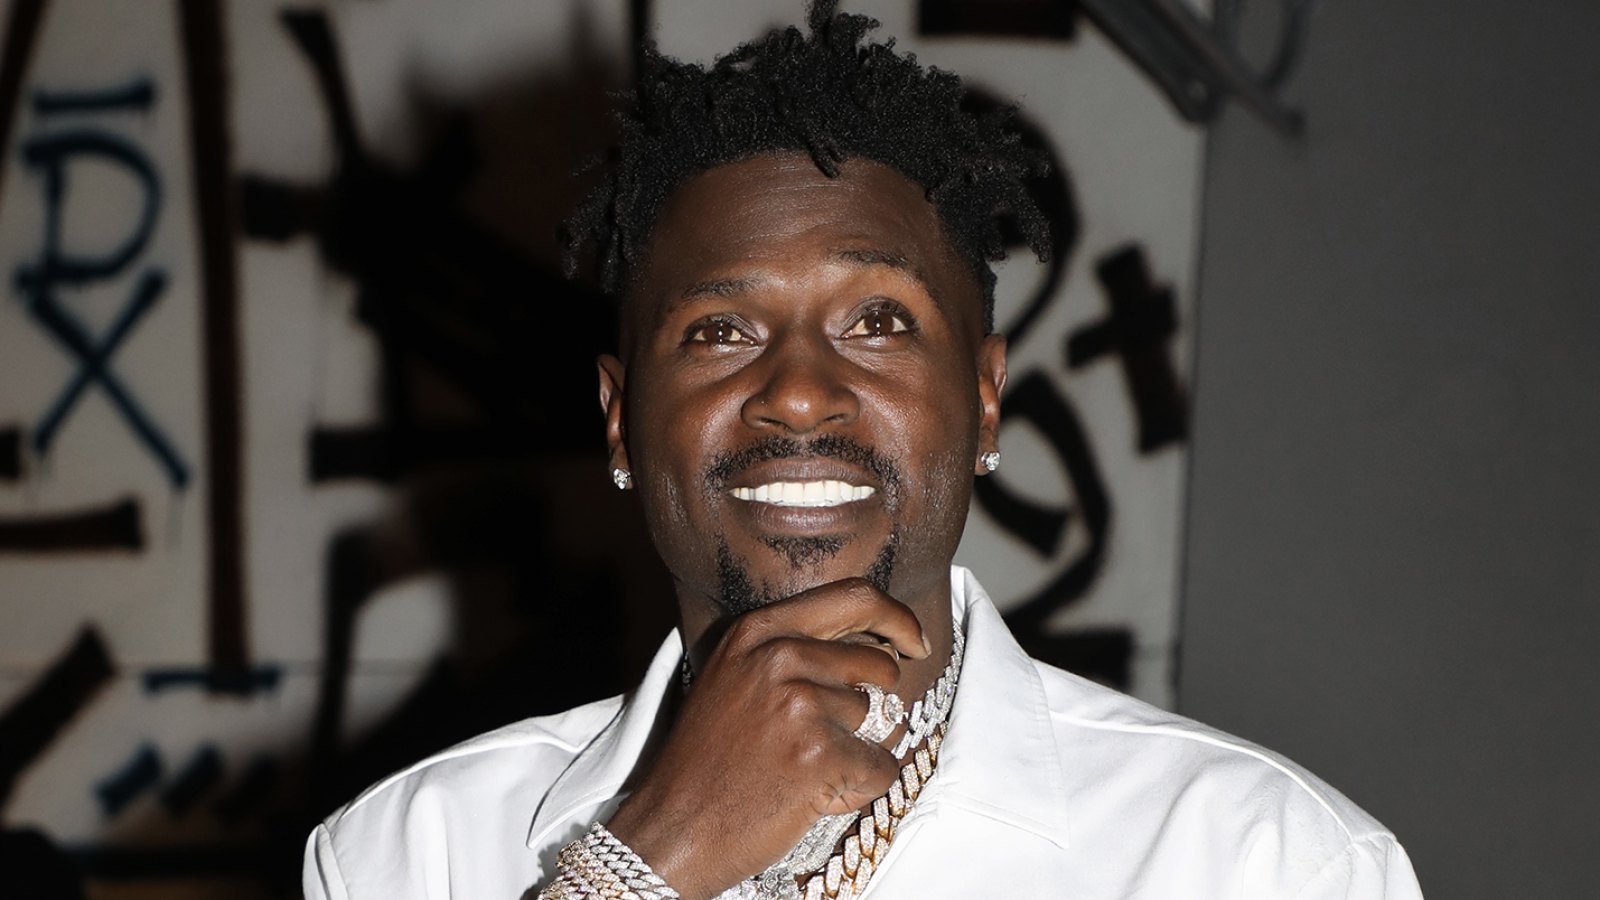 Football Player Antonio Brown's Rolling Loud Festival Rap Goes Viral After His NFL Exit